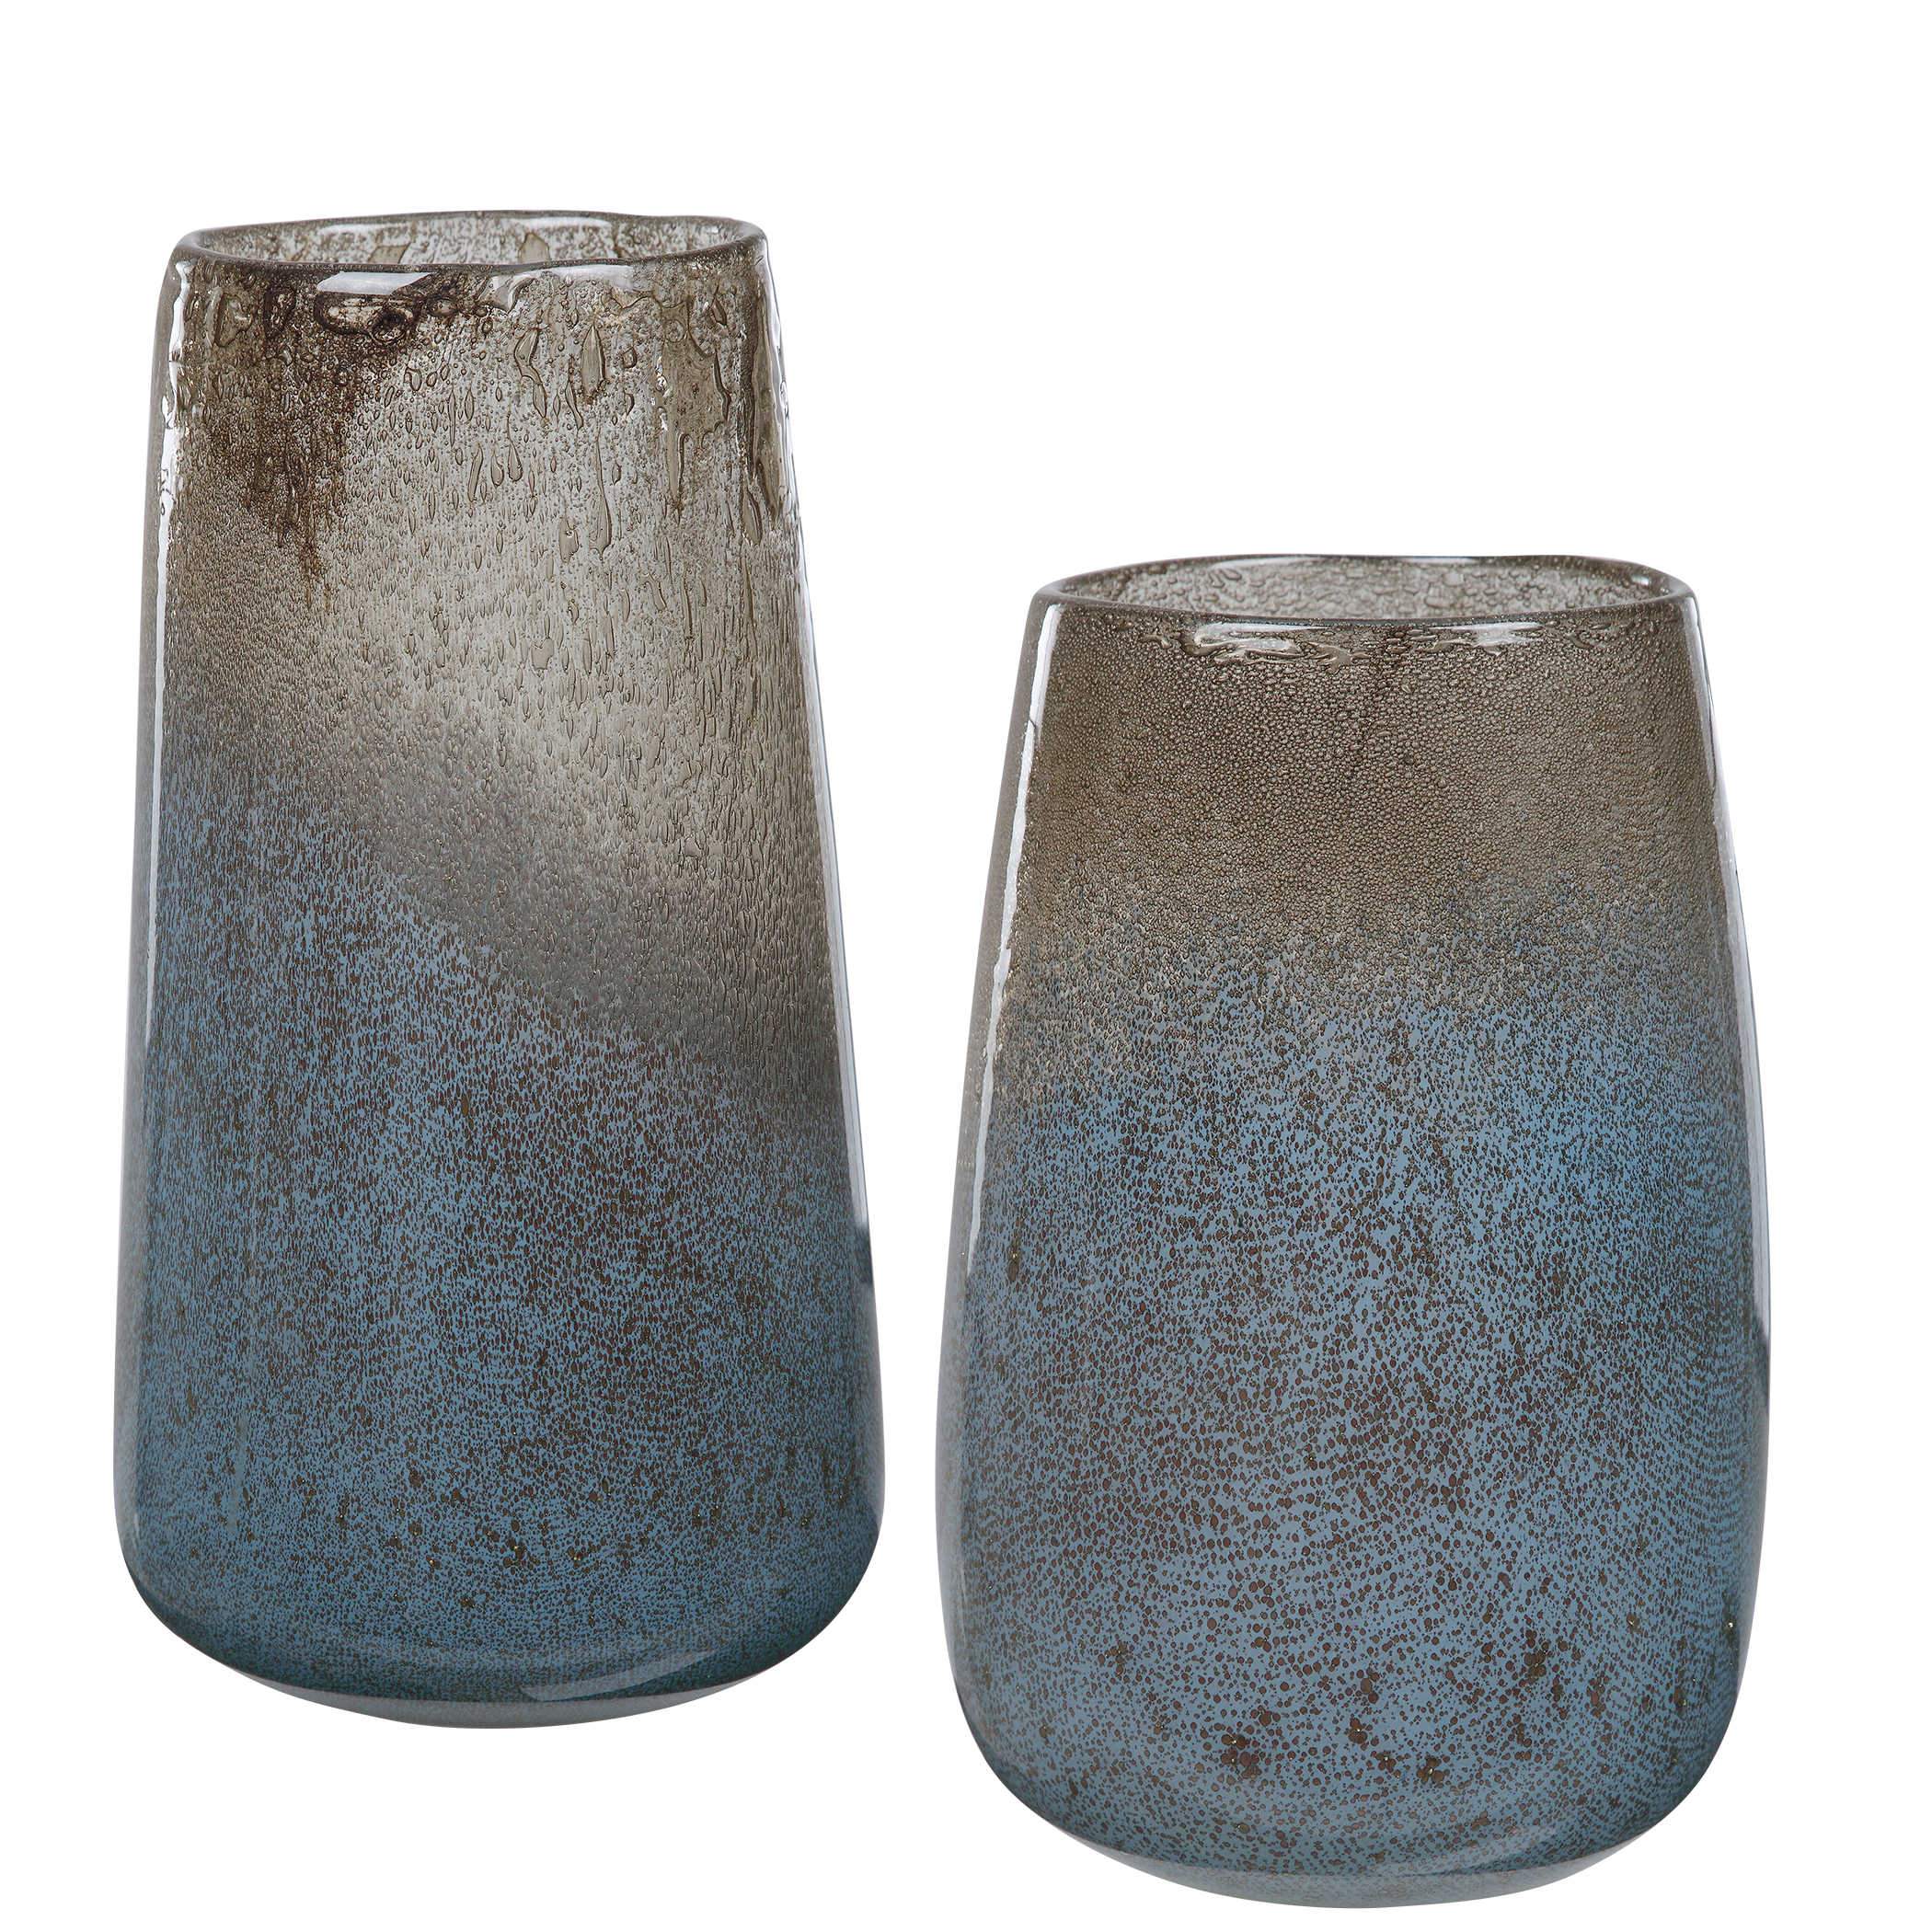 Uttermost Home Uttermost Ione Vases, S/2